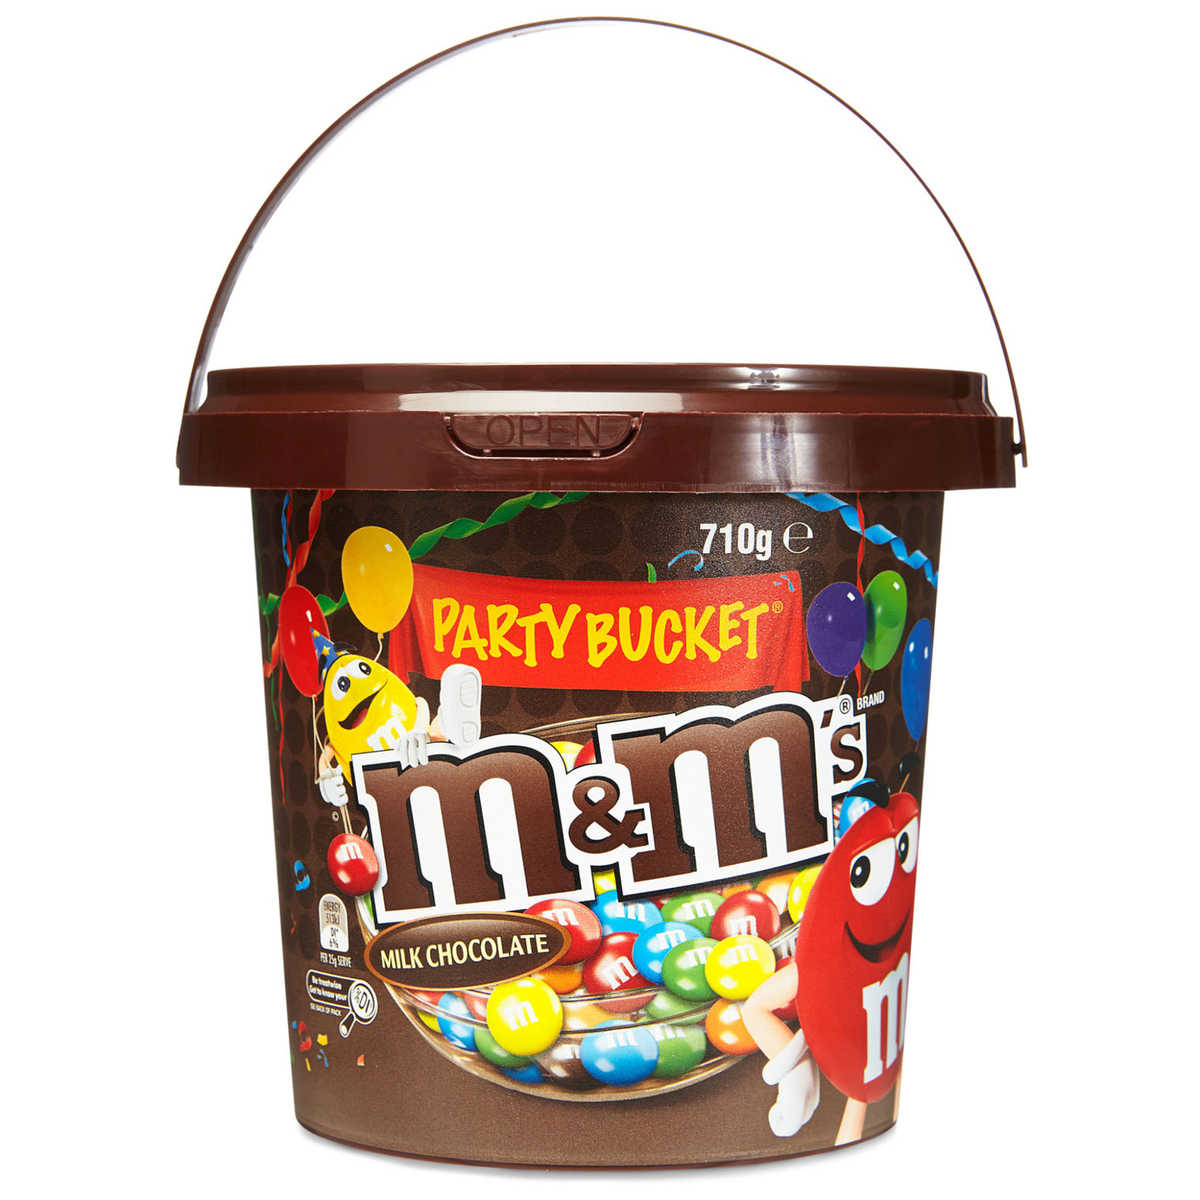 Bucket of M&M's Chocolate A chocolate gift to add to a